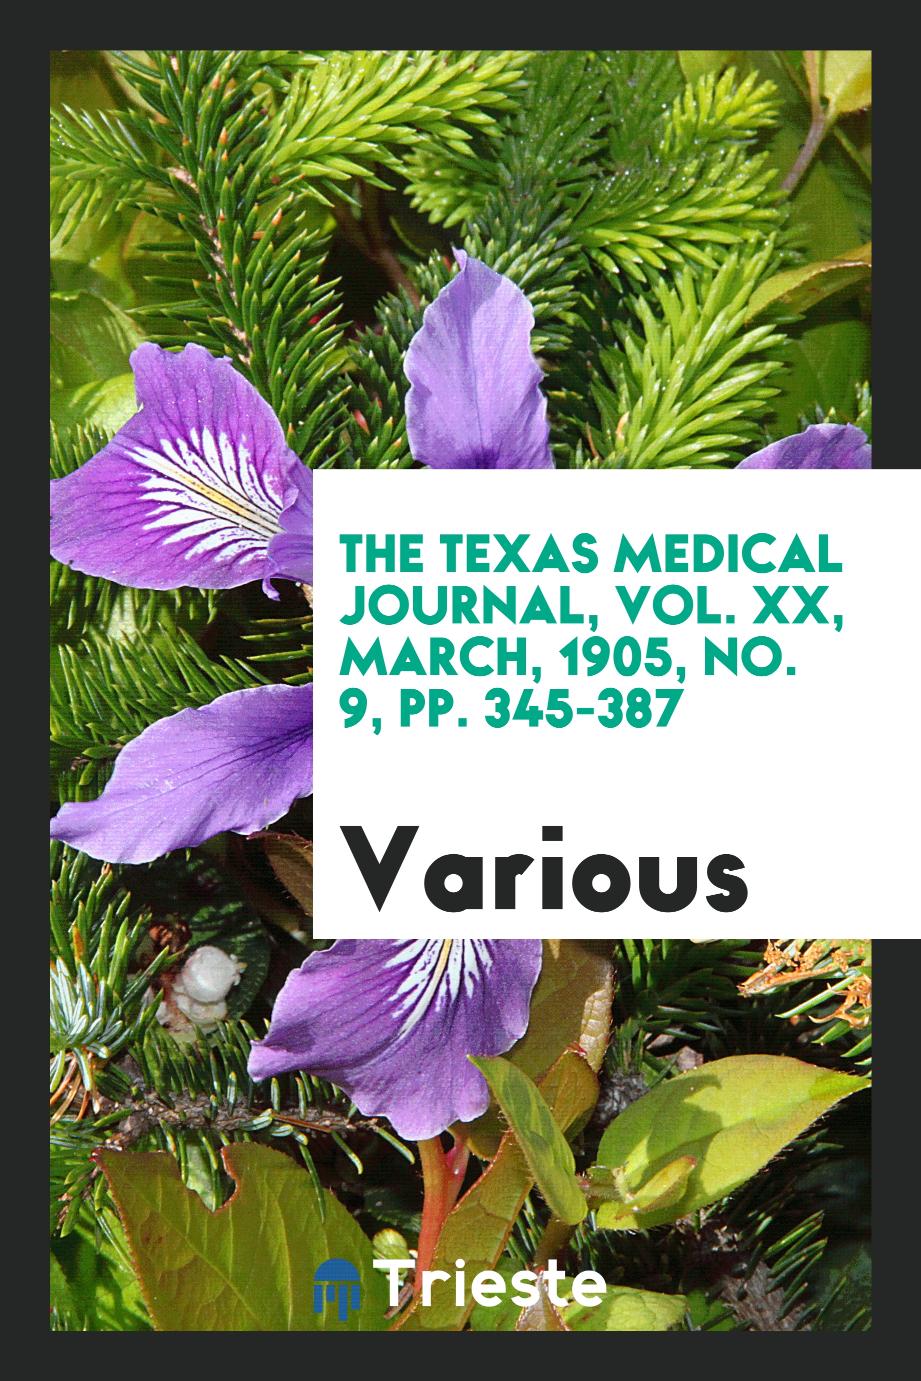 The Texas Medical Journal, Vol. XX, march, 1905, No. 9, pp. 345-387